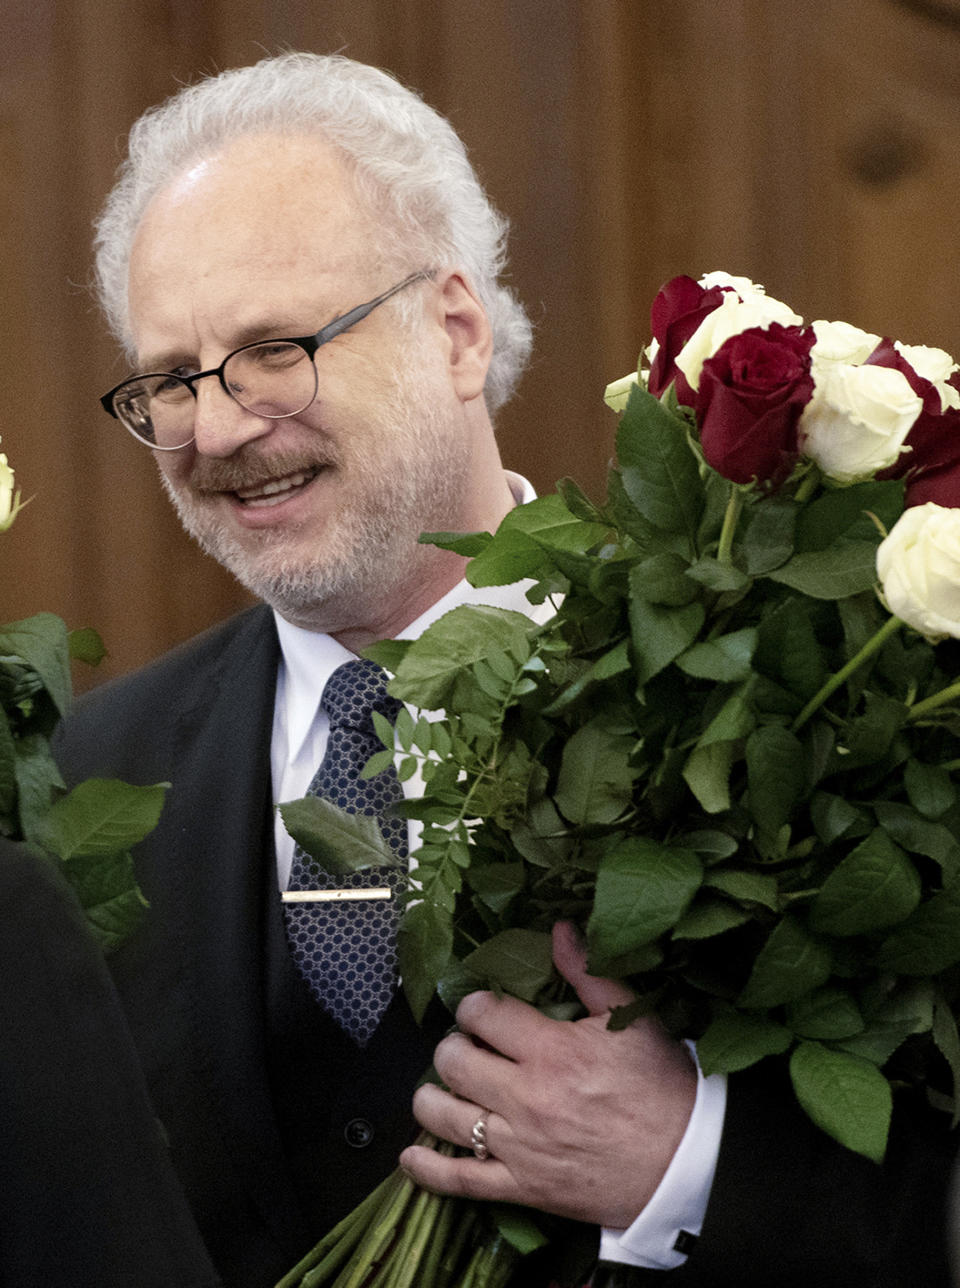 Newly elected Latvian President Egils Levits hold a bunch of flowers after lawmakers elected him in a parliament in Riga, Latvia, Wednesday, May 29, 2019. Levits received 61 votes already in the first round of voting, well above the 51 needed to win the election. (Vladislavs Proskins,/F64 Photo Agency via AP)